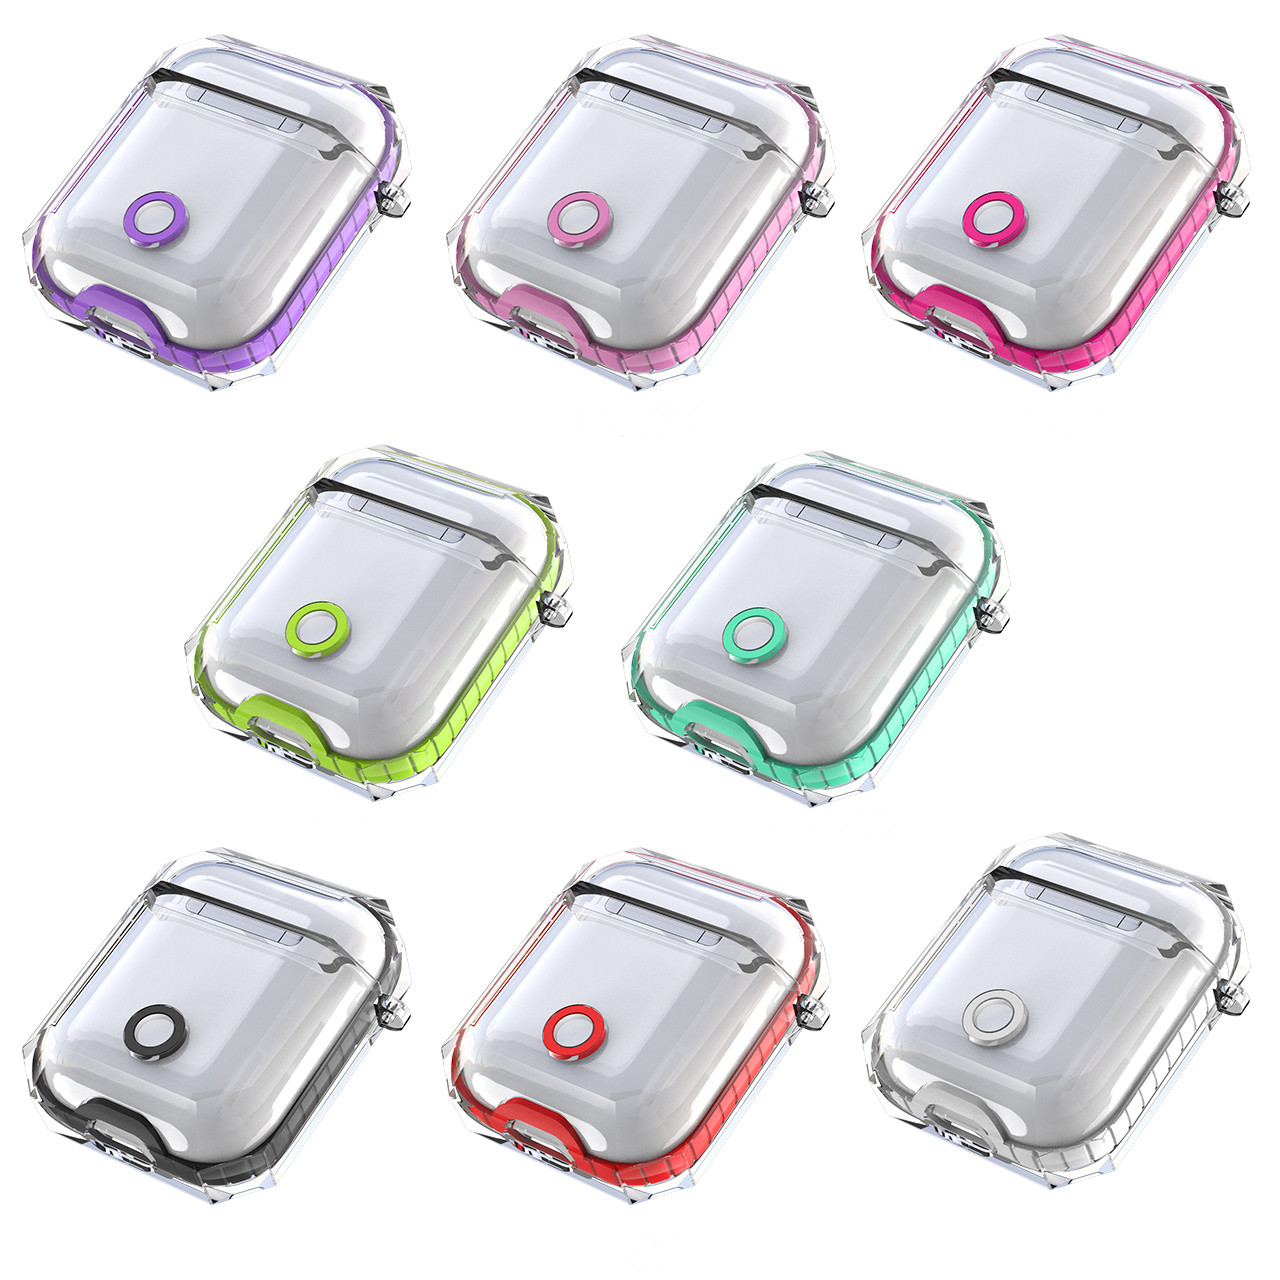 Bakeey-Transparent-Soft-TPU-Shockproof-Non-slip-Earphone-Storage-Case-for-Apple-Airpods-1--Apple-Air-1606188-8